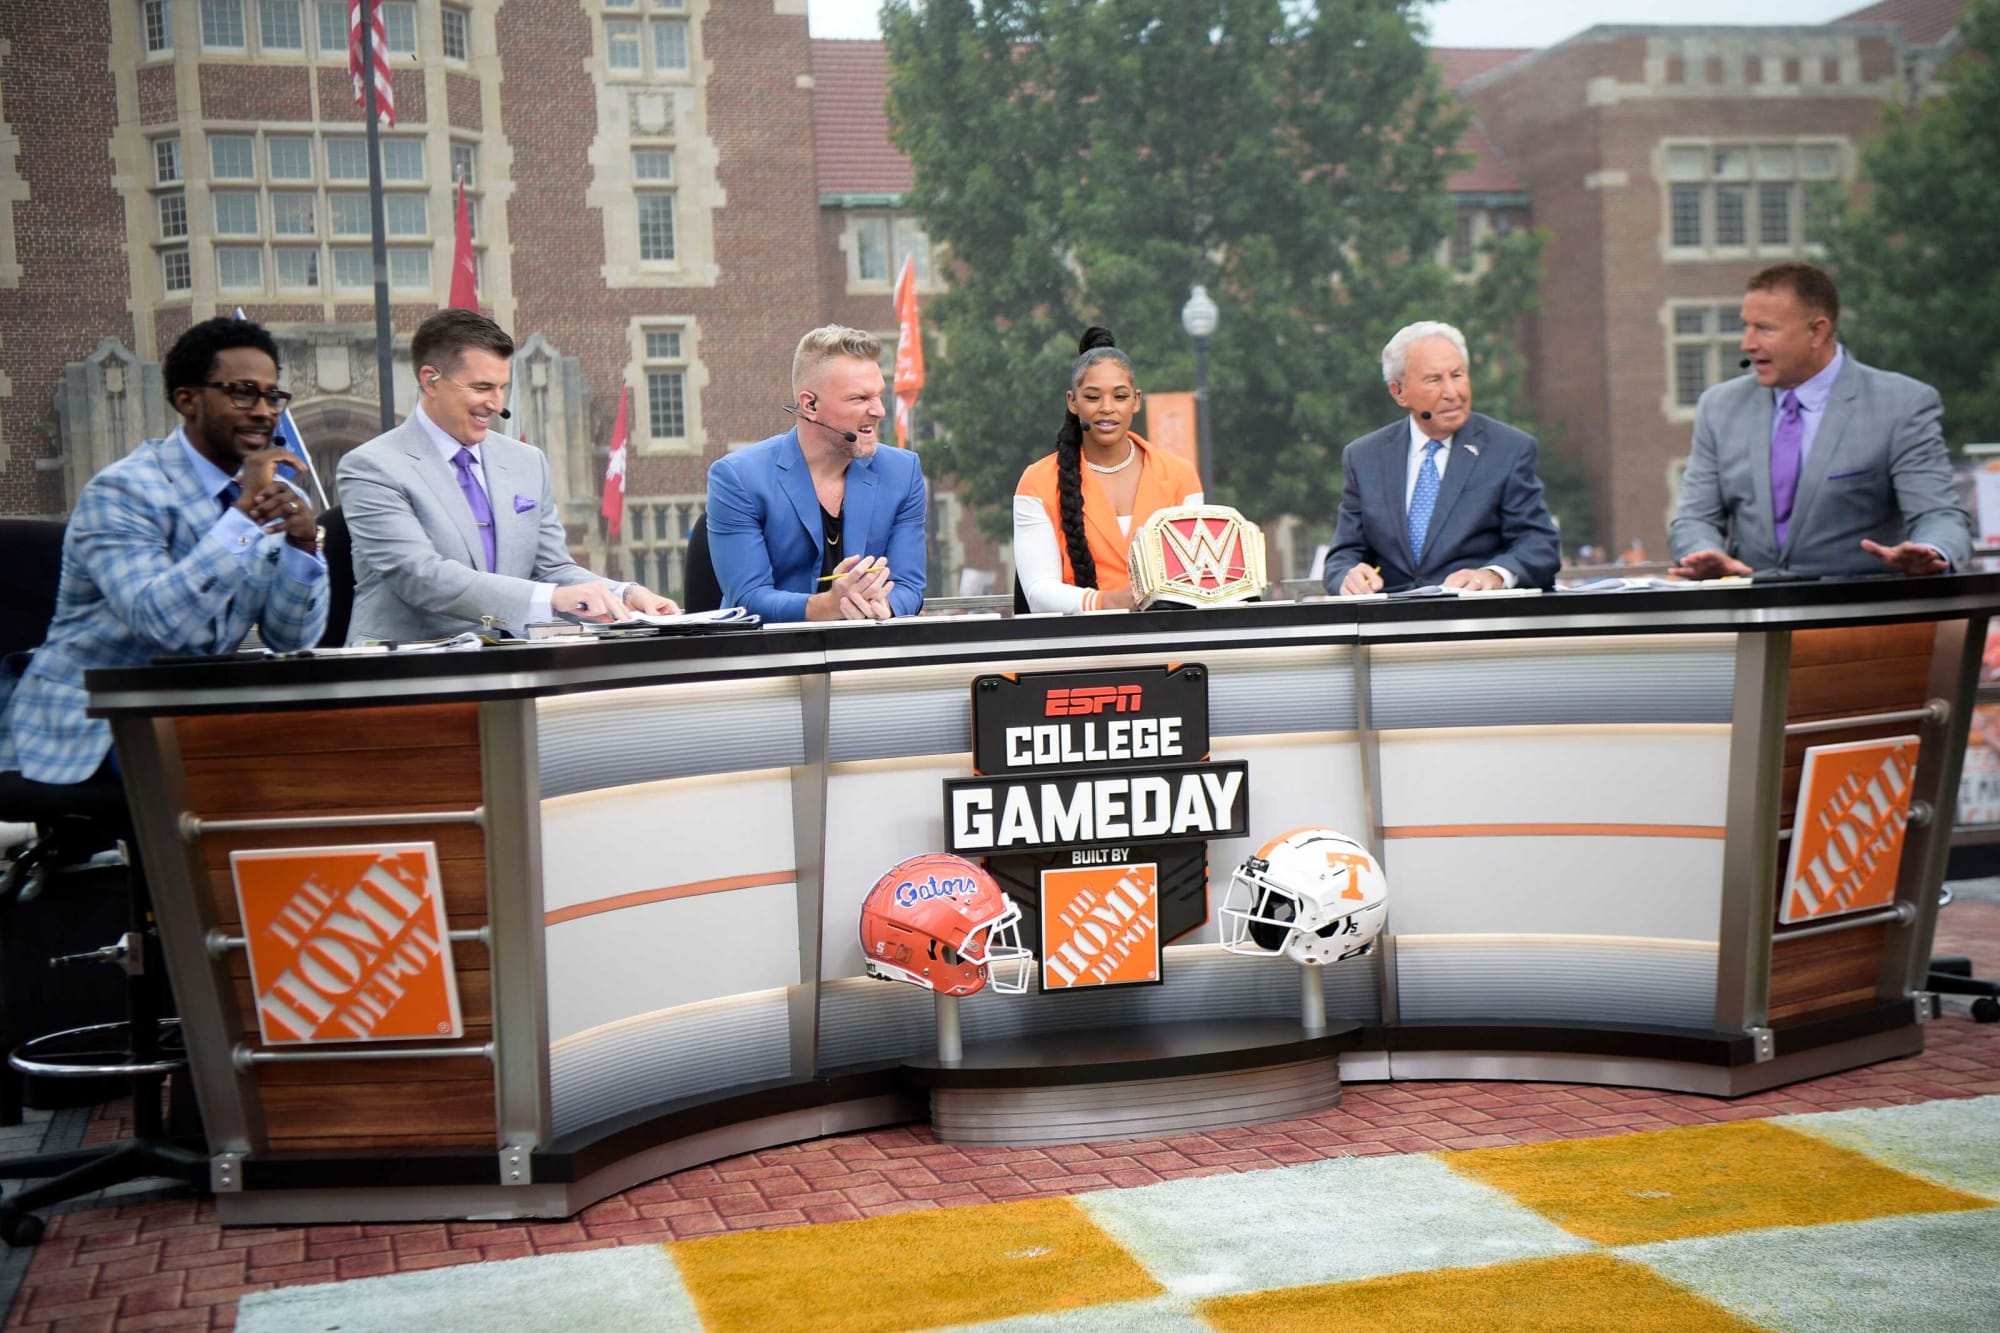 College GameDay: Locations, all-time appearances, most times hosting